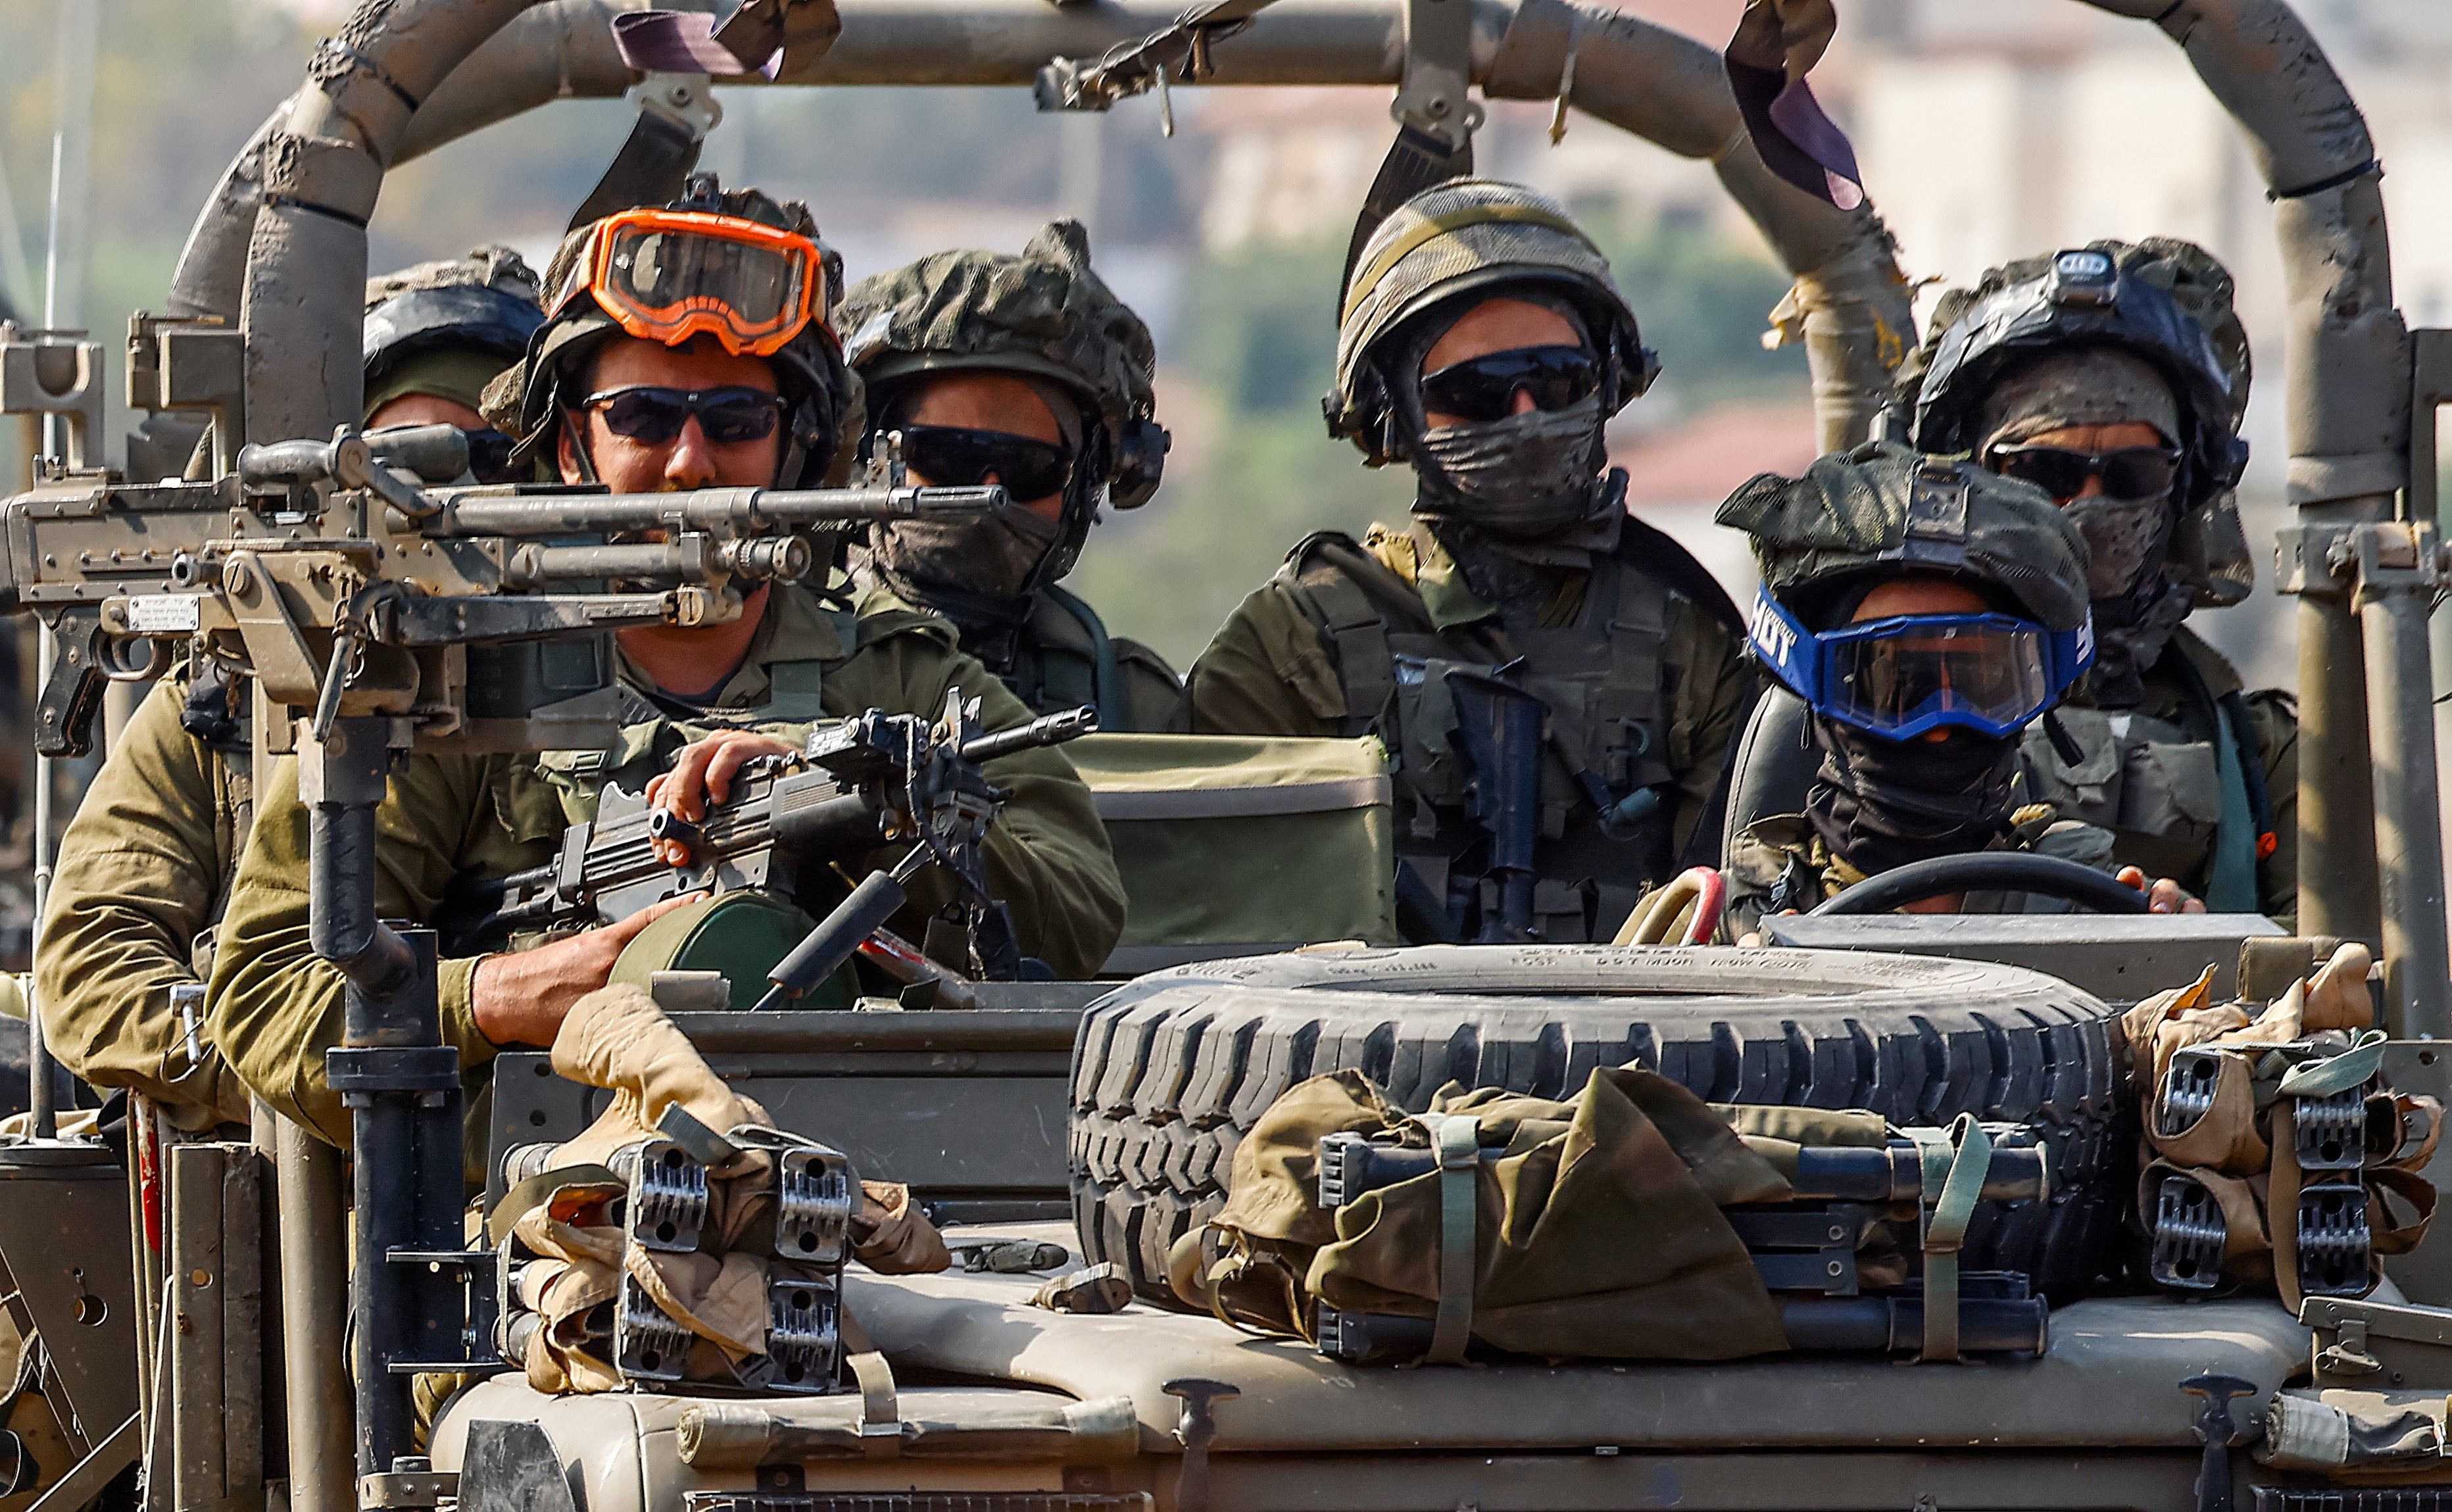 Israeli soldiers patrol on a street in Sderot, near the border with Gaza